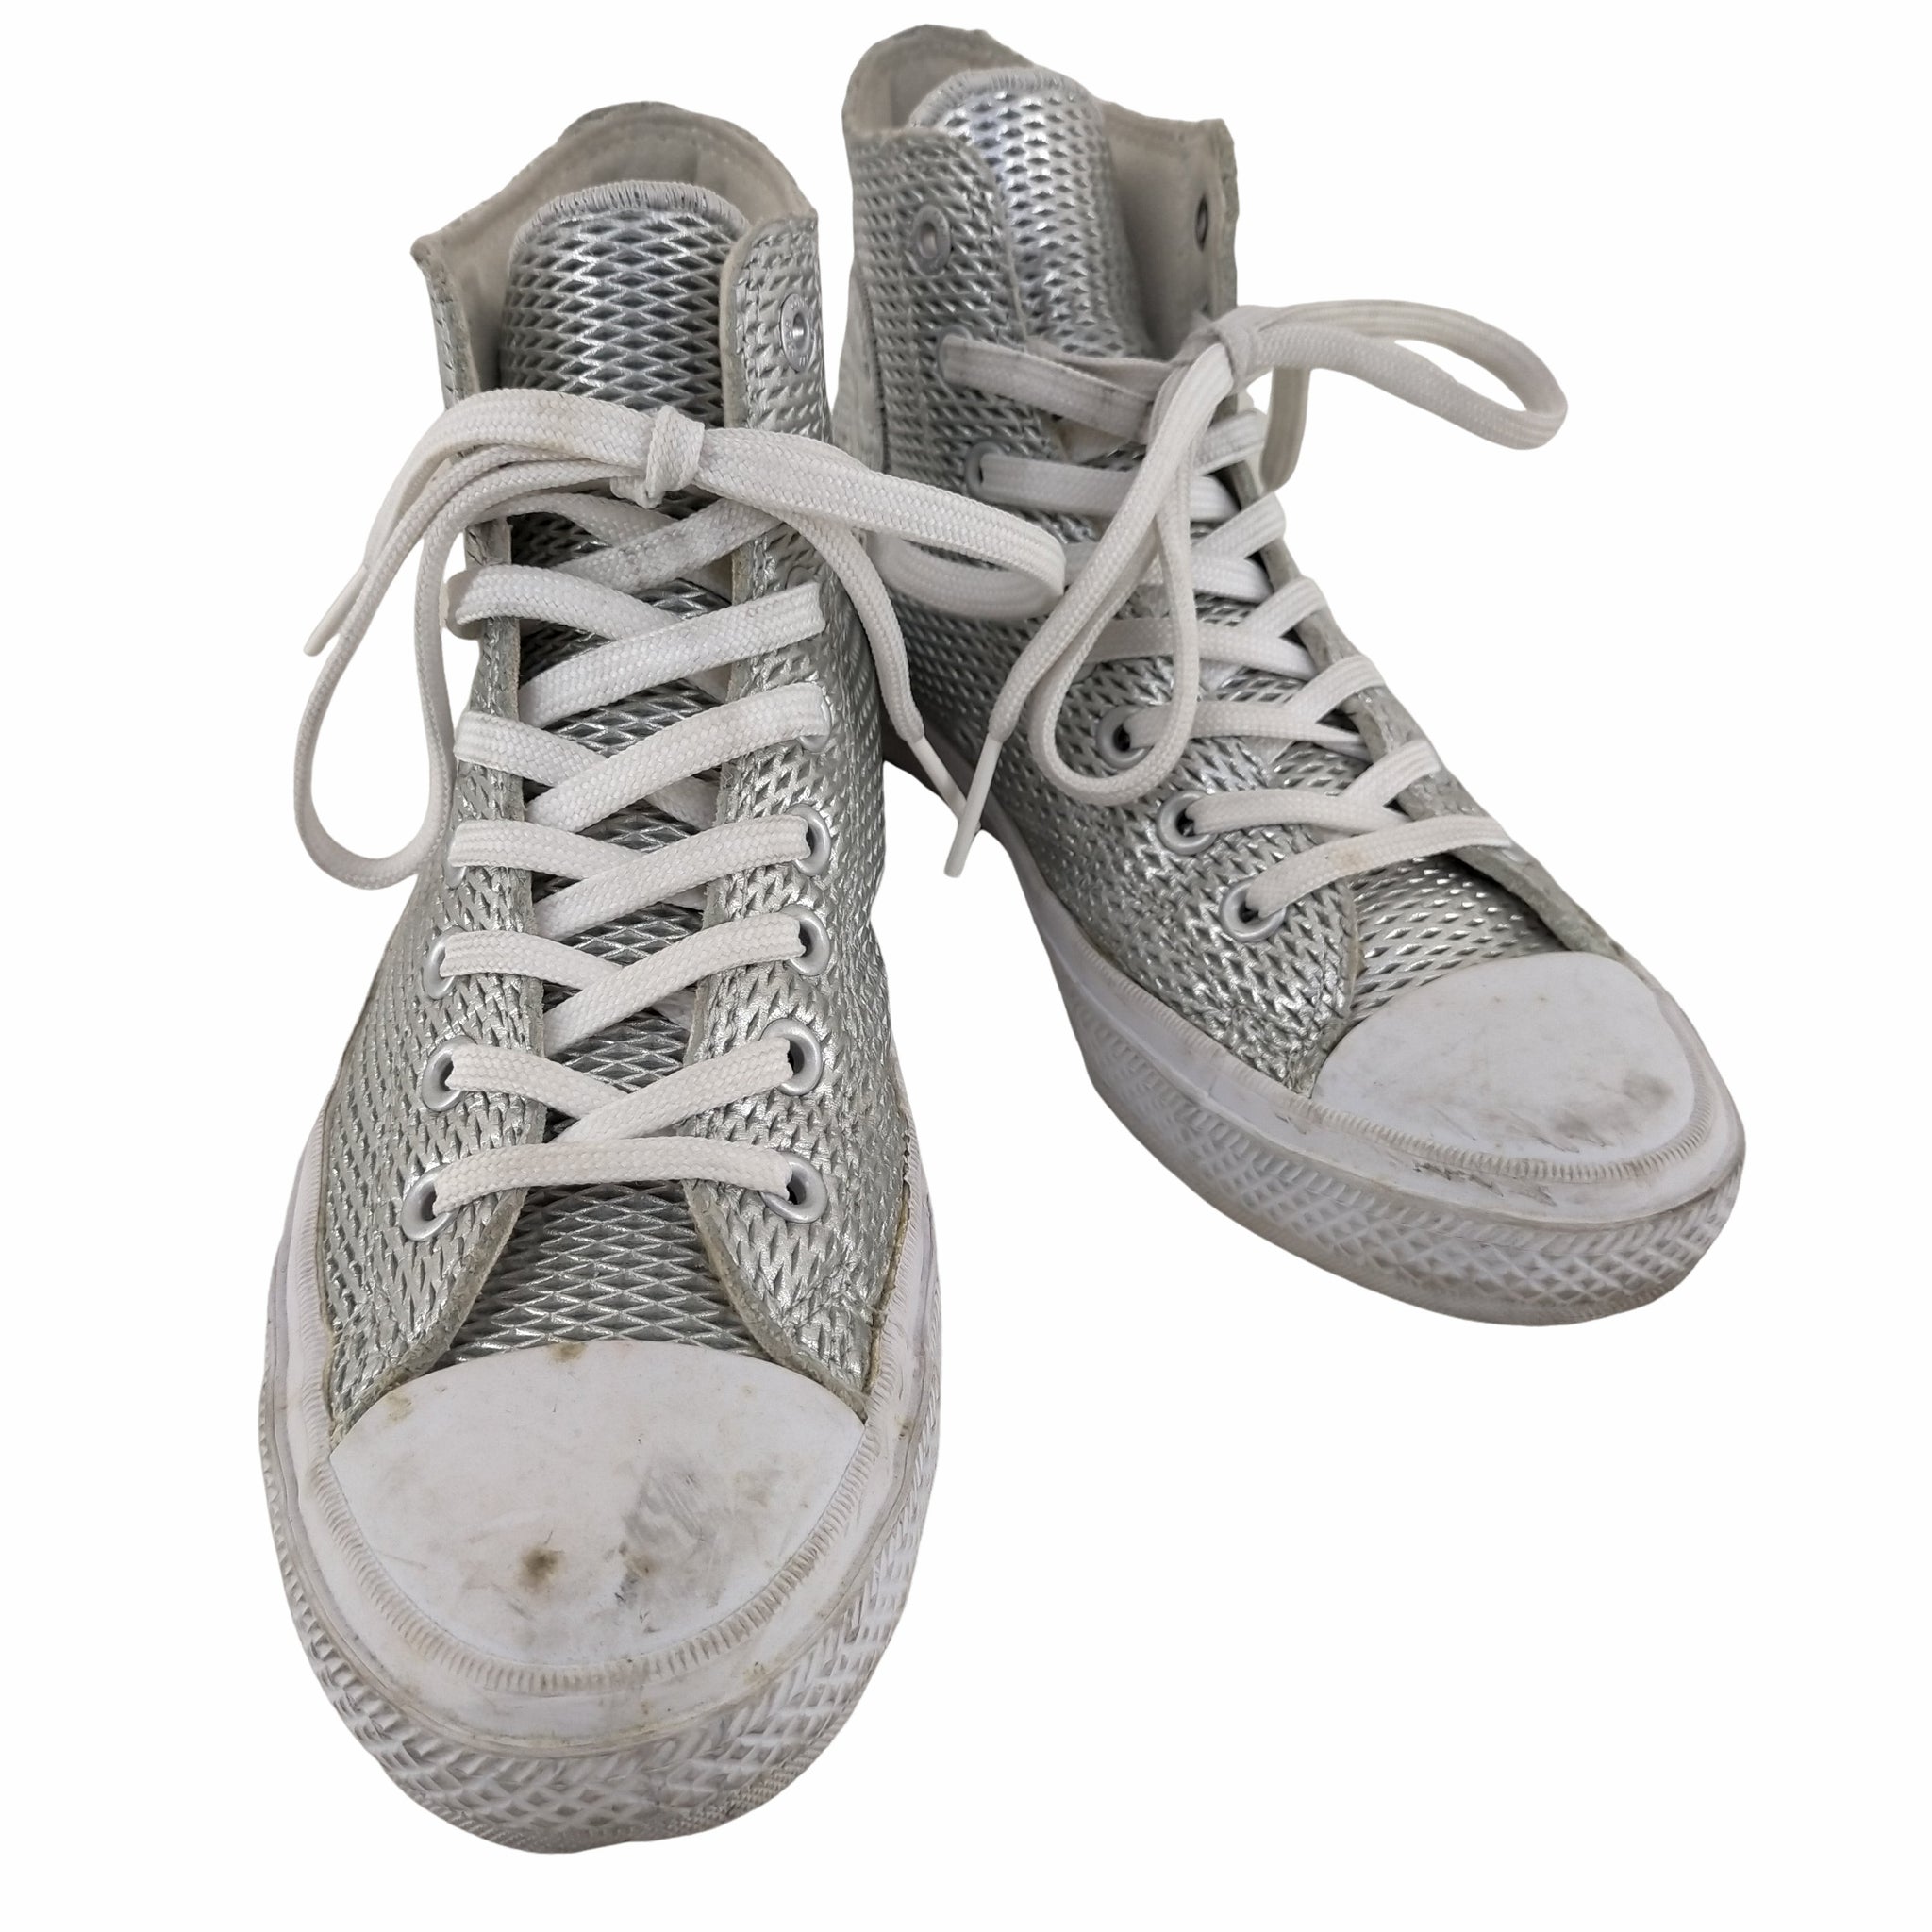 CONVERSE(コンバース)Chuck Taylor All Star 2 High 'Perforated Metallic Silver